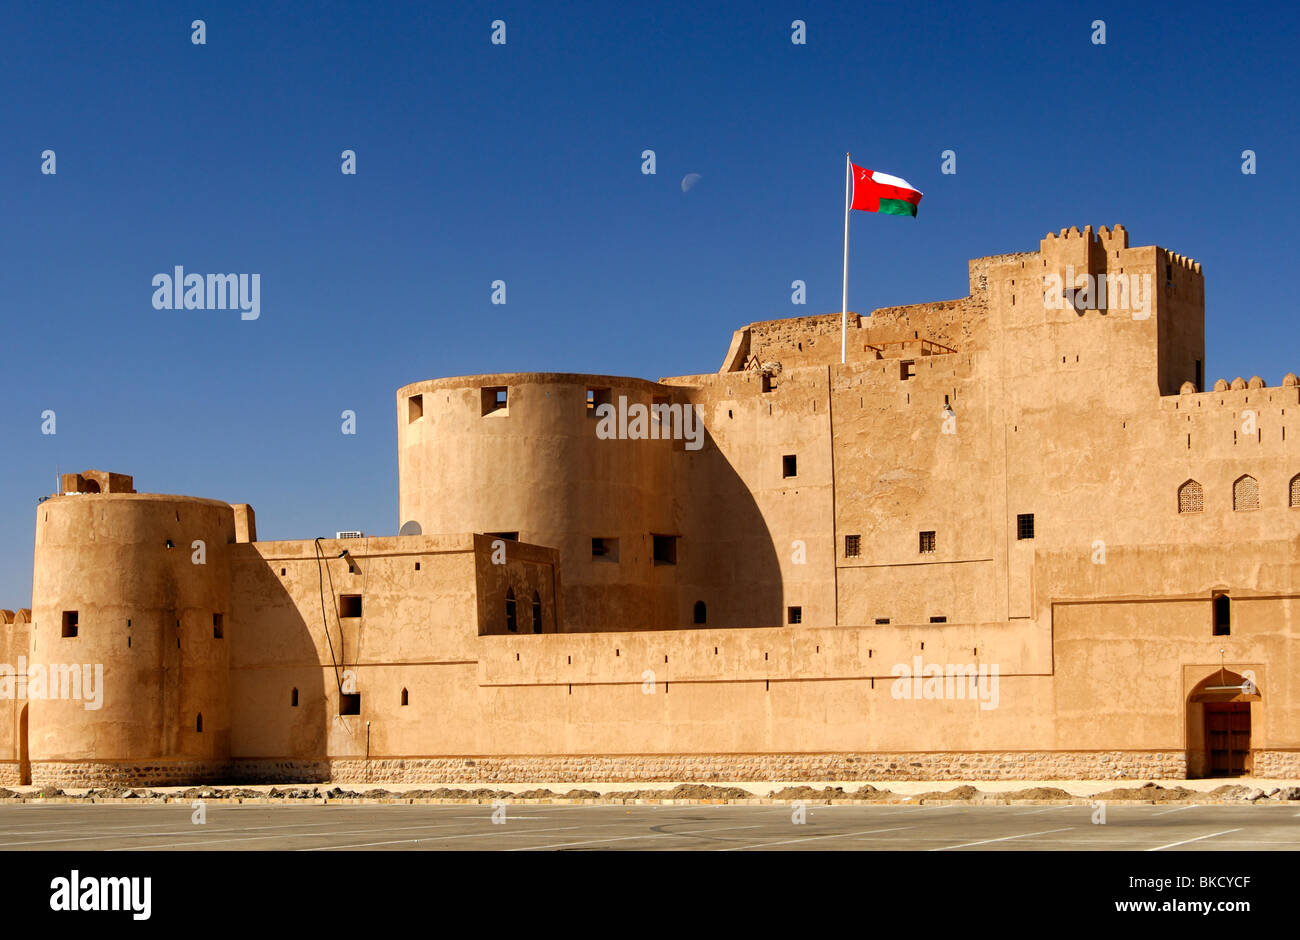 National flag of Oman fluttering over the Jabrin castle, historic adobe fort in the Dhakiliya Region, Sultanate of Oman Stock Photo